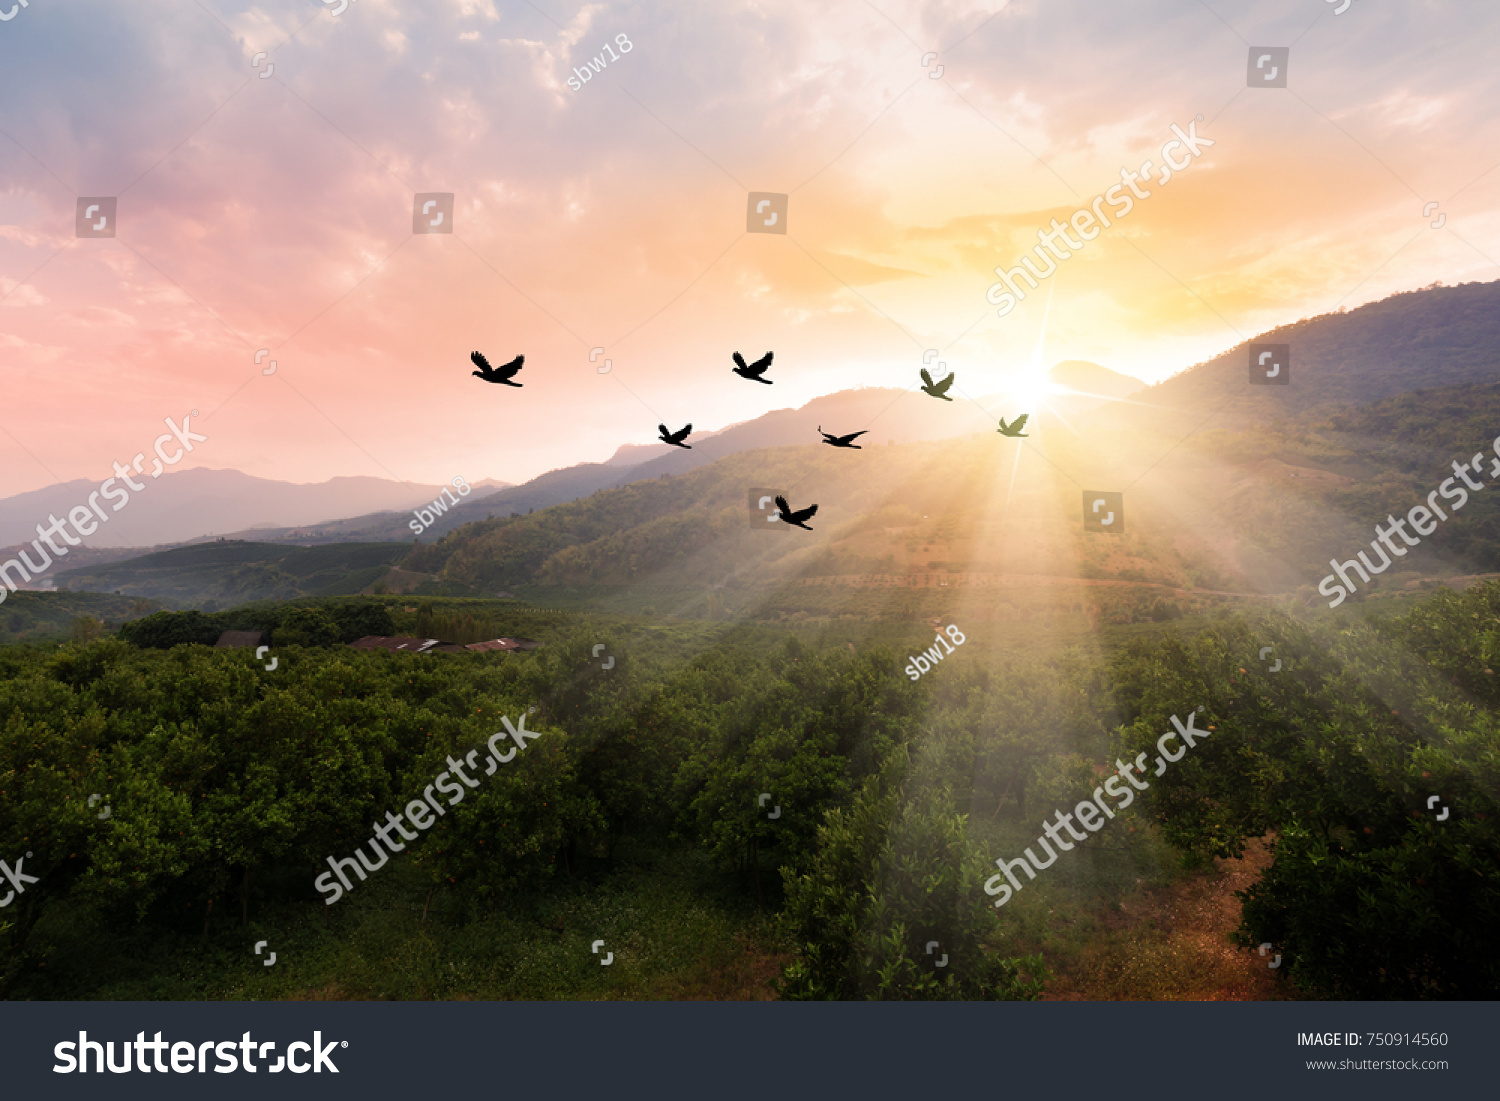 Silhouette flock of birds flying over the valley on  sunbeam twilight sky at sunset.
Birds flying.
The freedom of birds in nature,freedom concept. #750914560